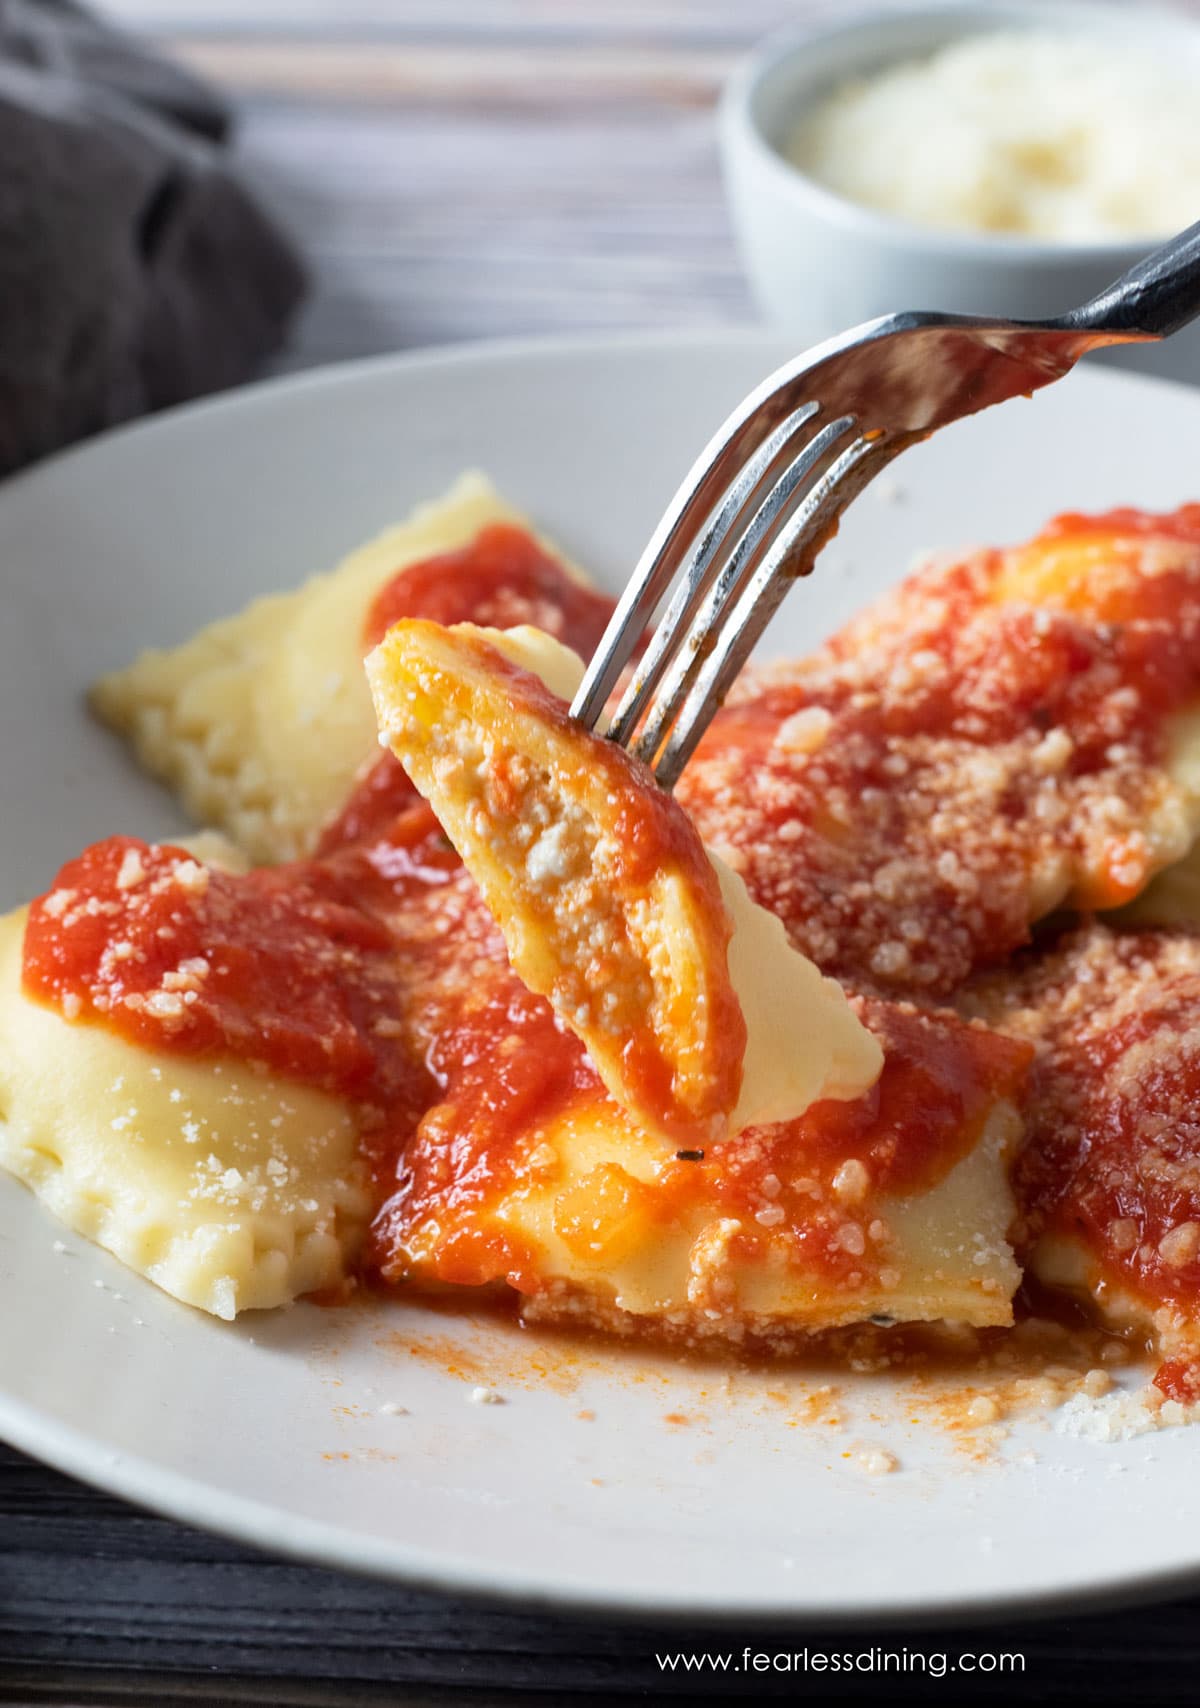 a slice of gluten free ravioli so you can see the ricotta filling inside